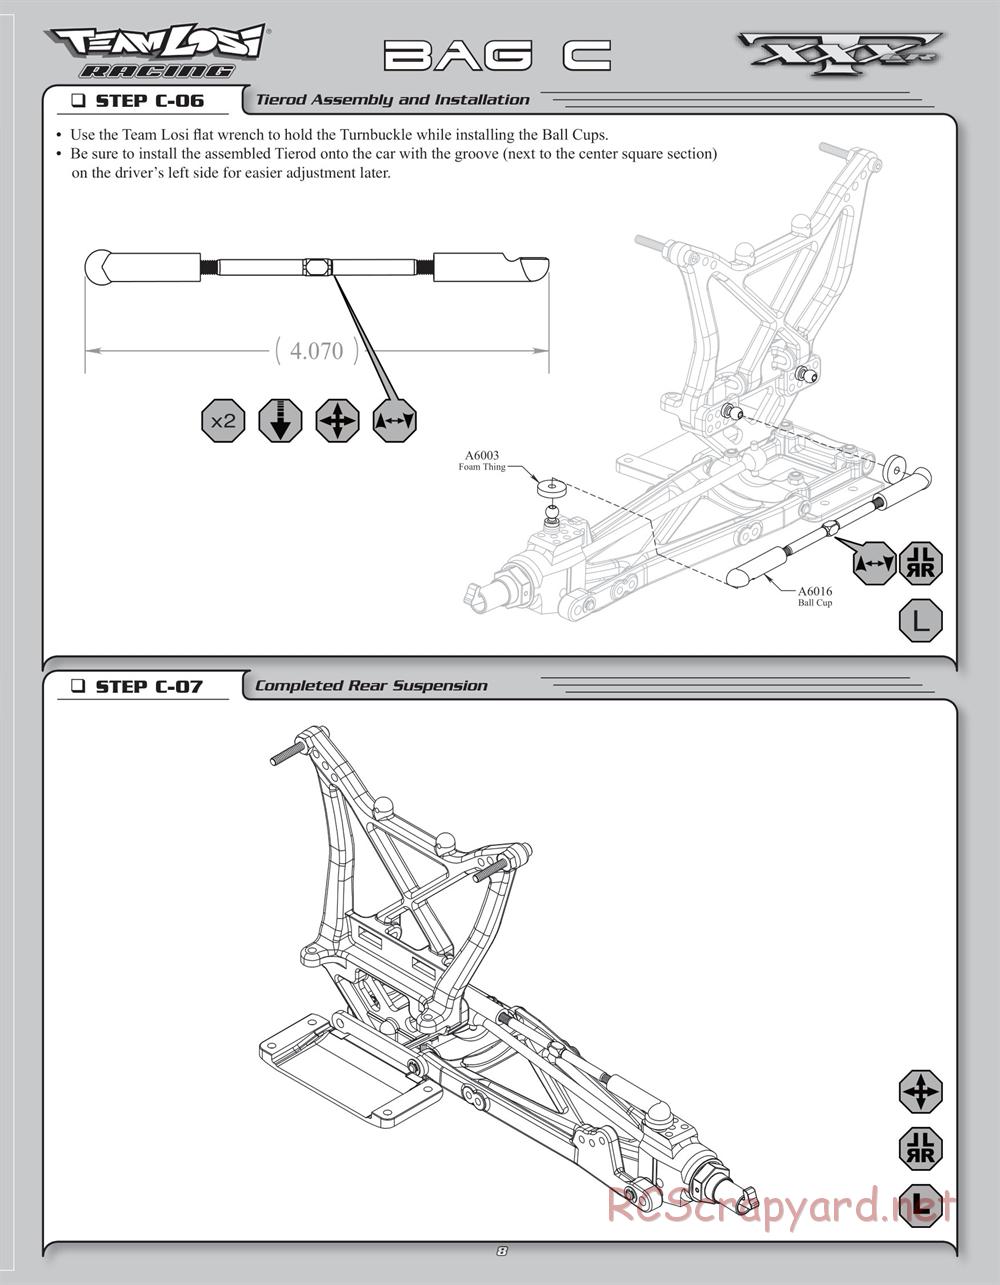 Team Losi - XXXT CR - Manual - Page 11